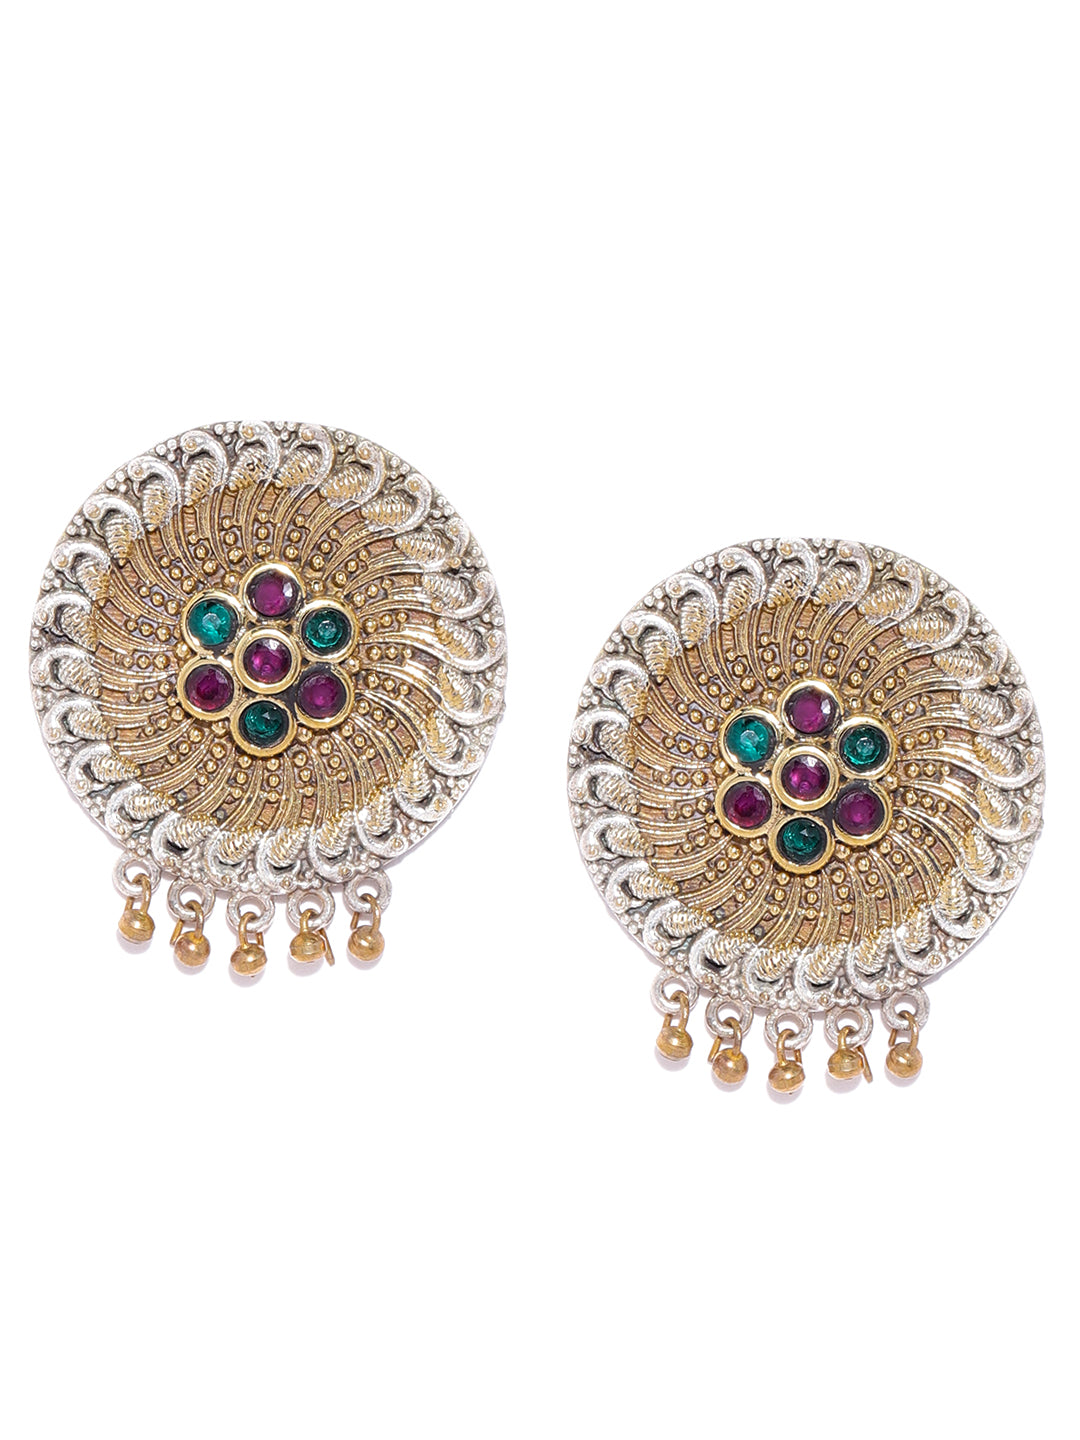 Oxidized Dual-Toned Magenta and Green Stones Studded Drop Earrings in Floral Pattern